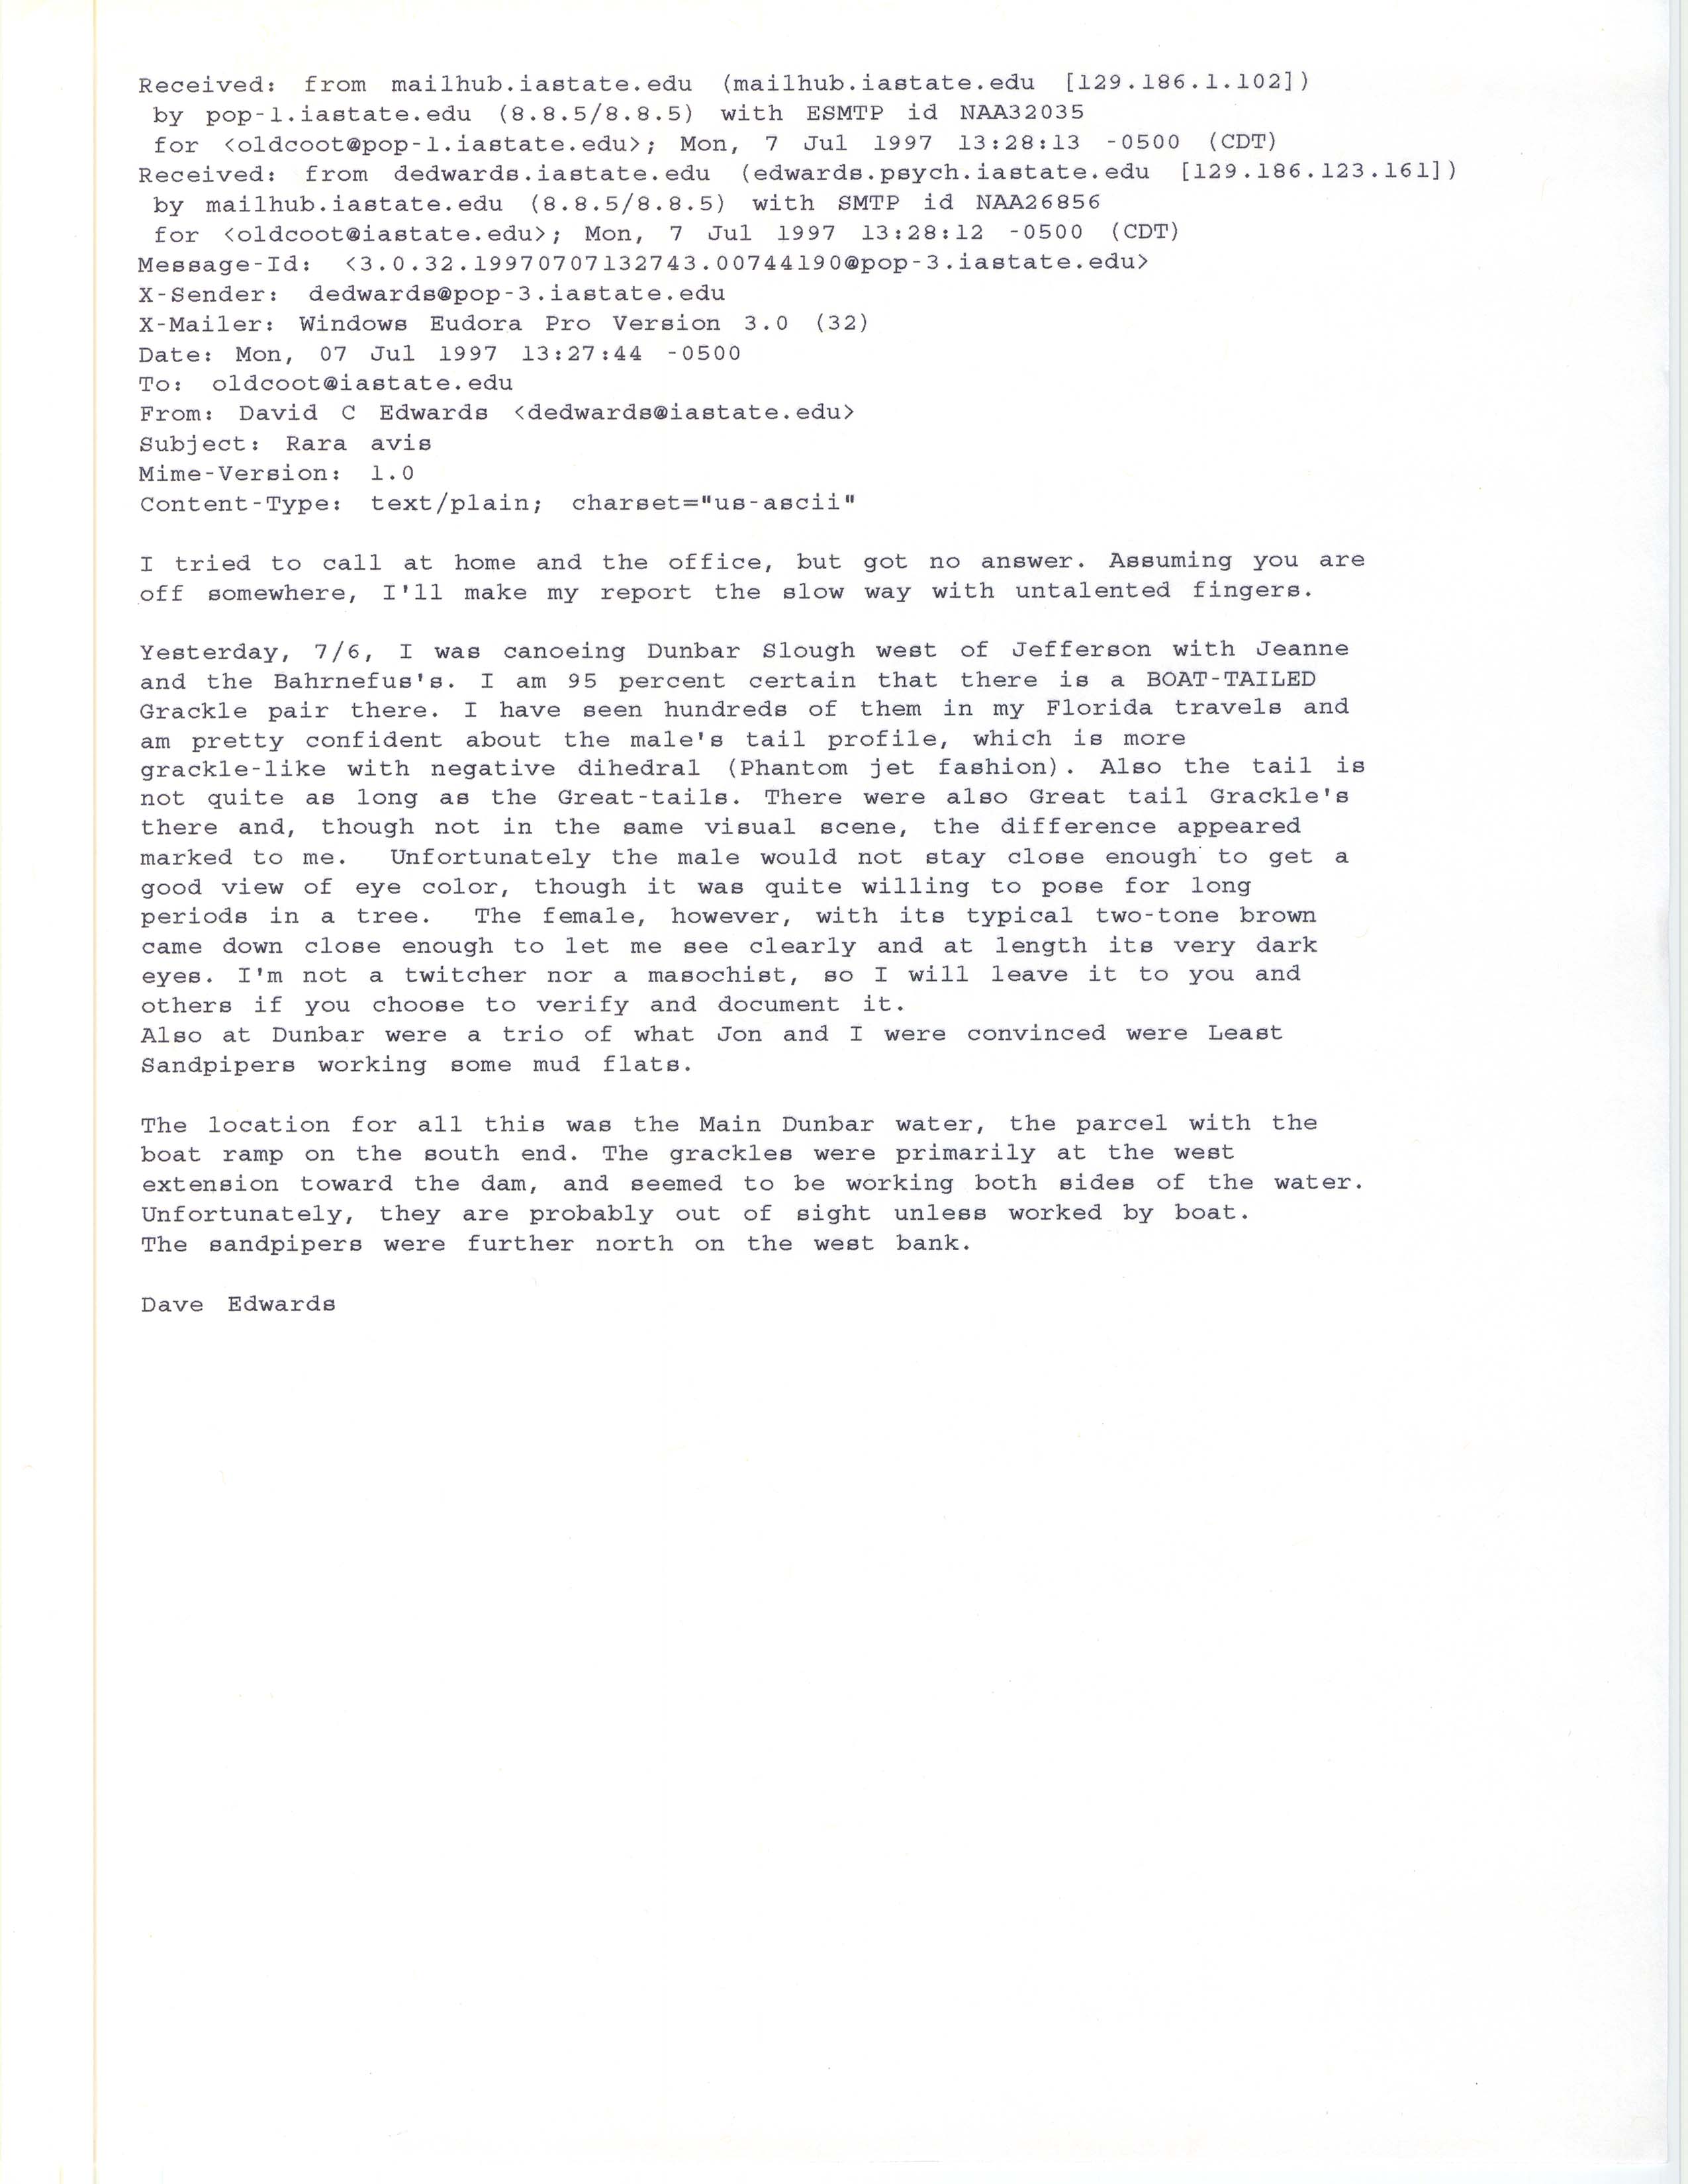 David C. Edwards email to James J. Dinsmore regarding a possible Great-tailed Grackle sighting, July 7, 1997 